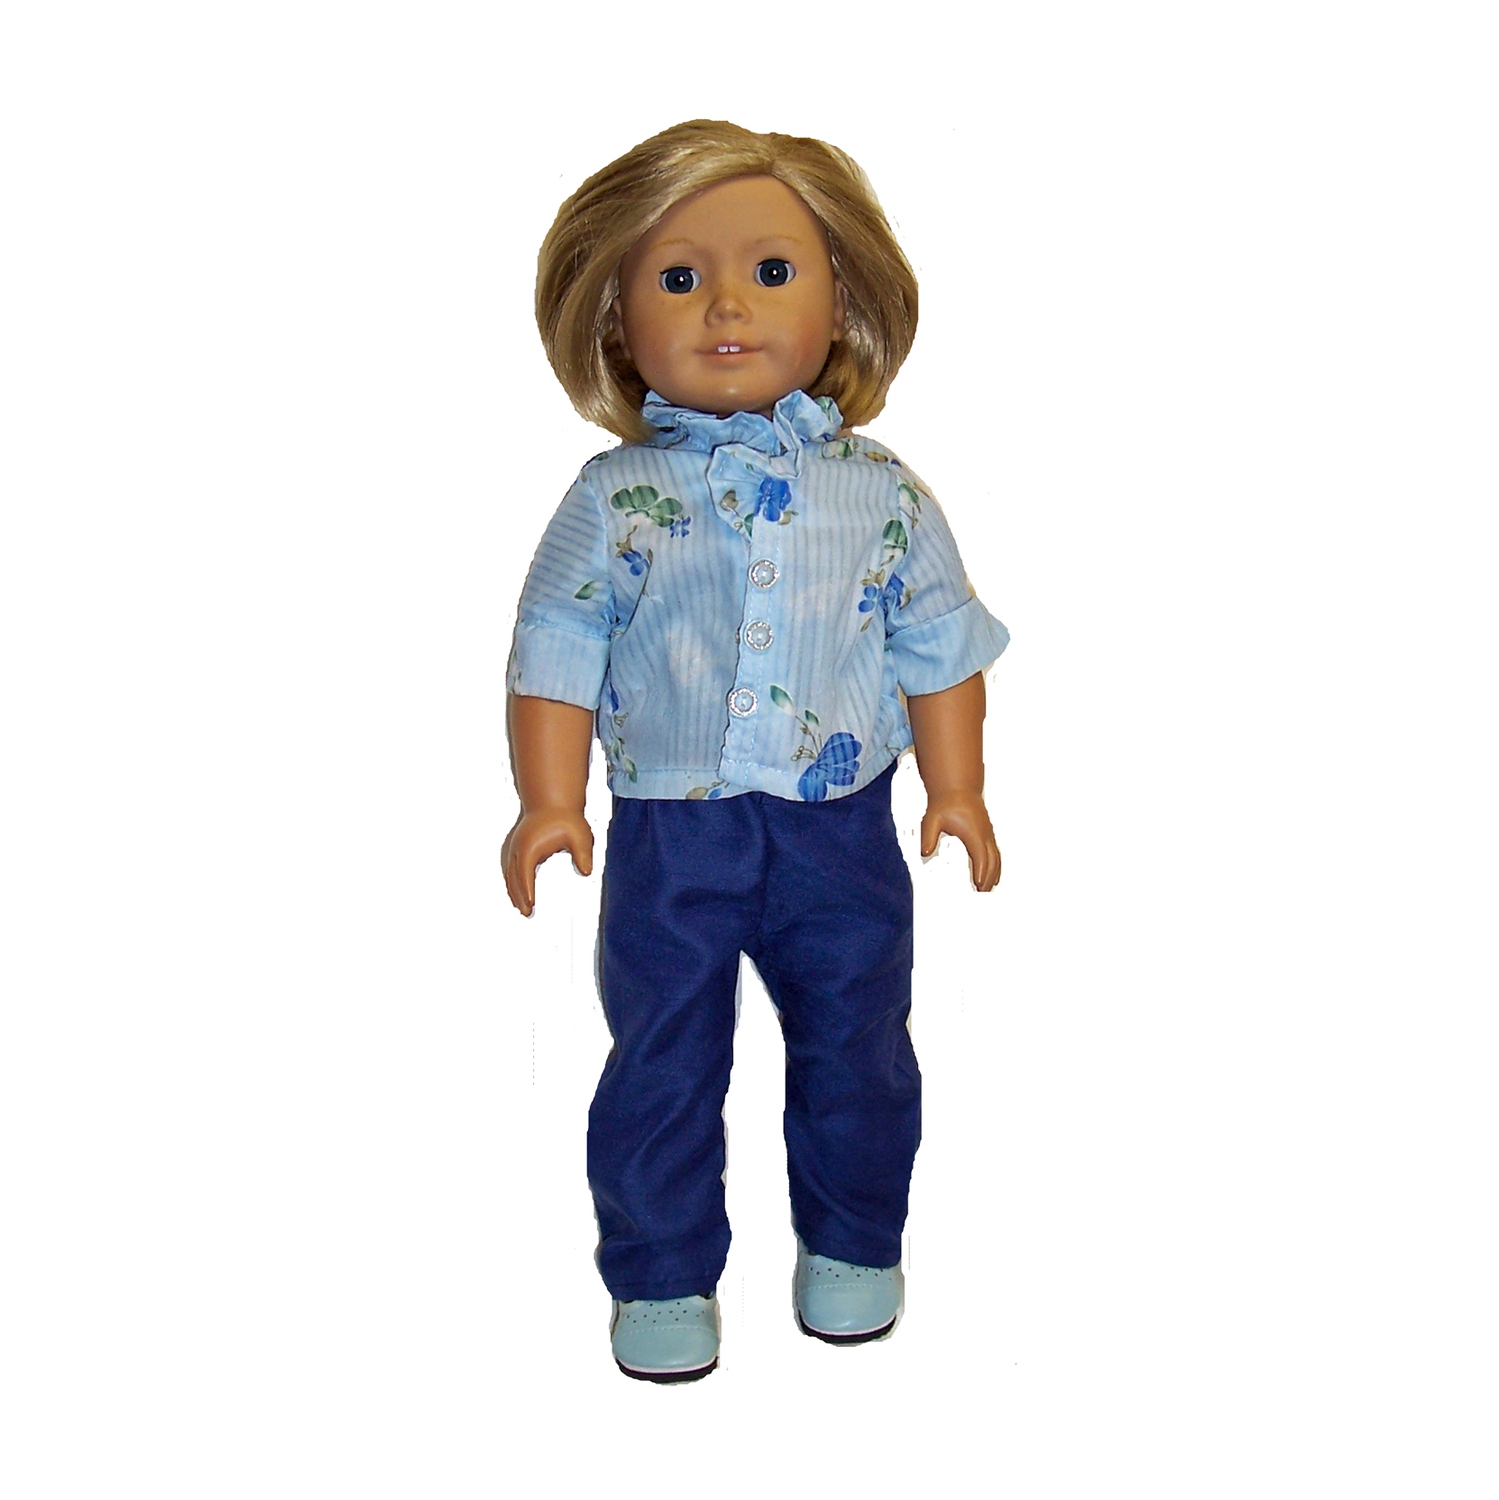 Doll Clothes Superstore Floral Shirt And Blue Pants For 18 Inch Dolls Like American Girl Our Generation My Life Dolls